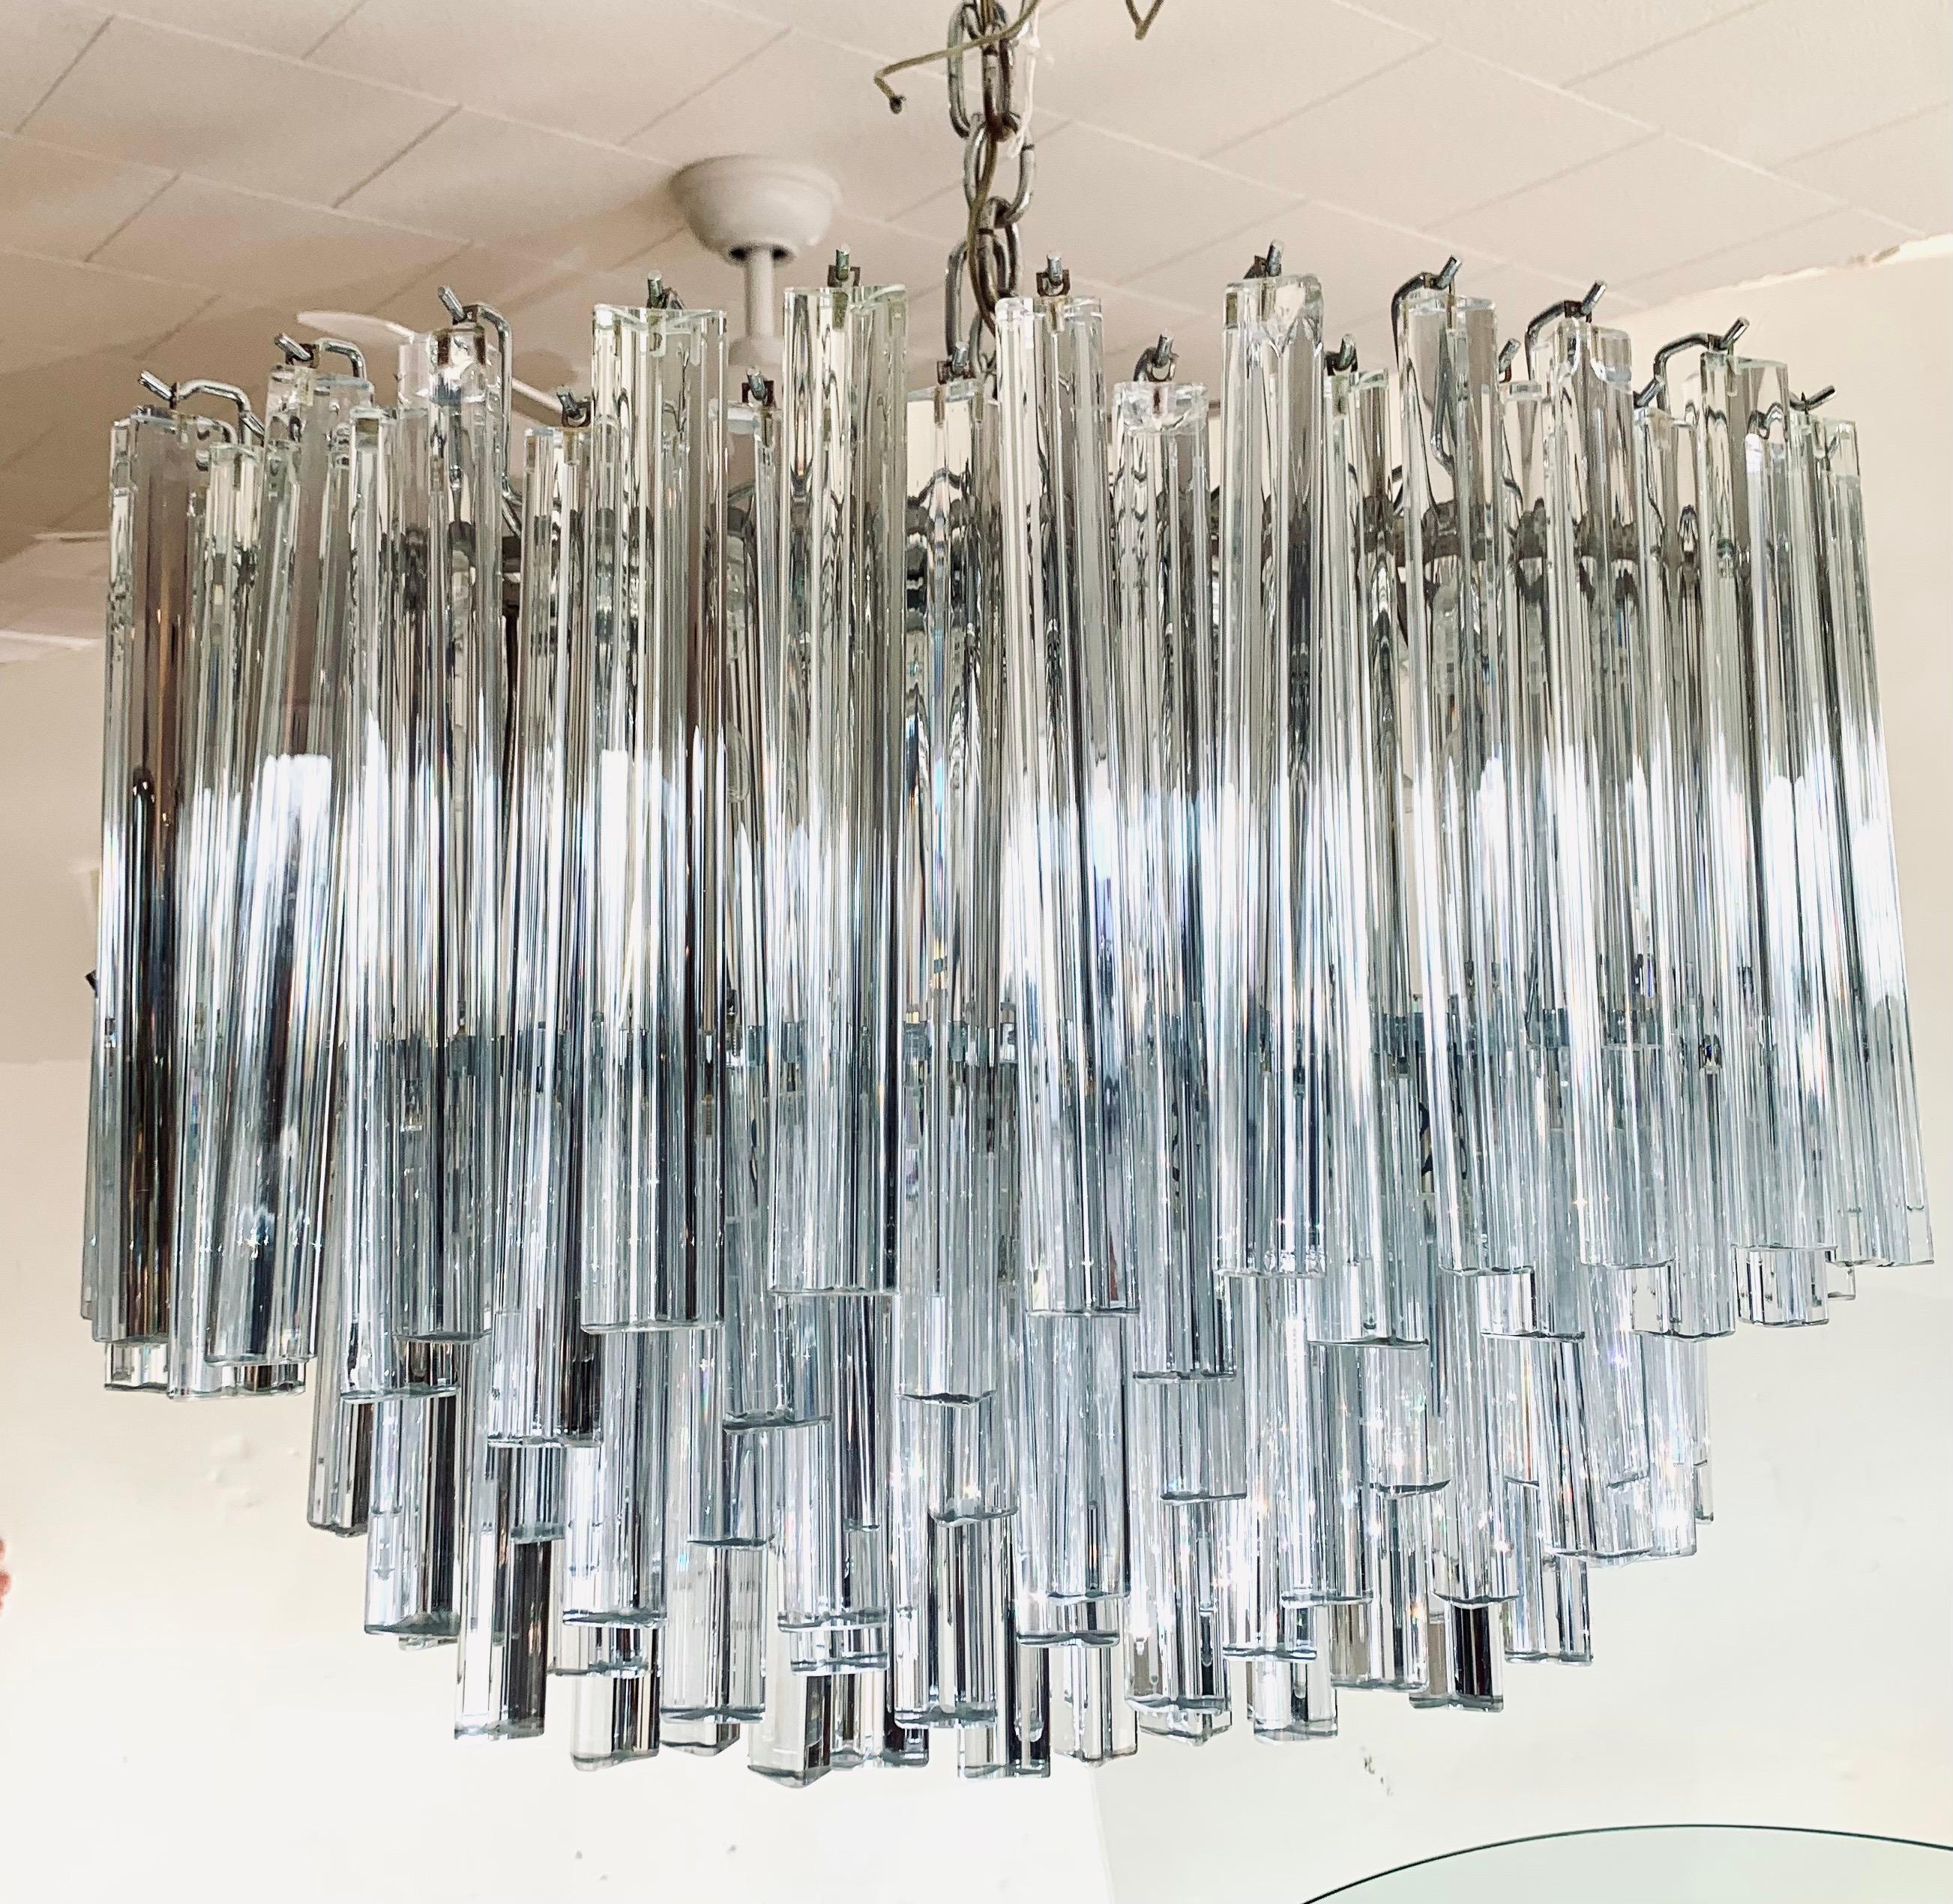 A magnificent Murano glass chandelier made by Camer. Comprised of individually handblown Murano glass triangular triede crystal prisms on a frame. An iconic and timeless classic. Note the oval curvature. Features eight lights.